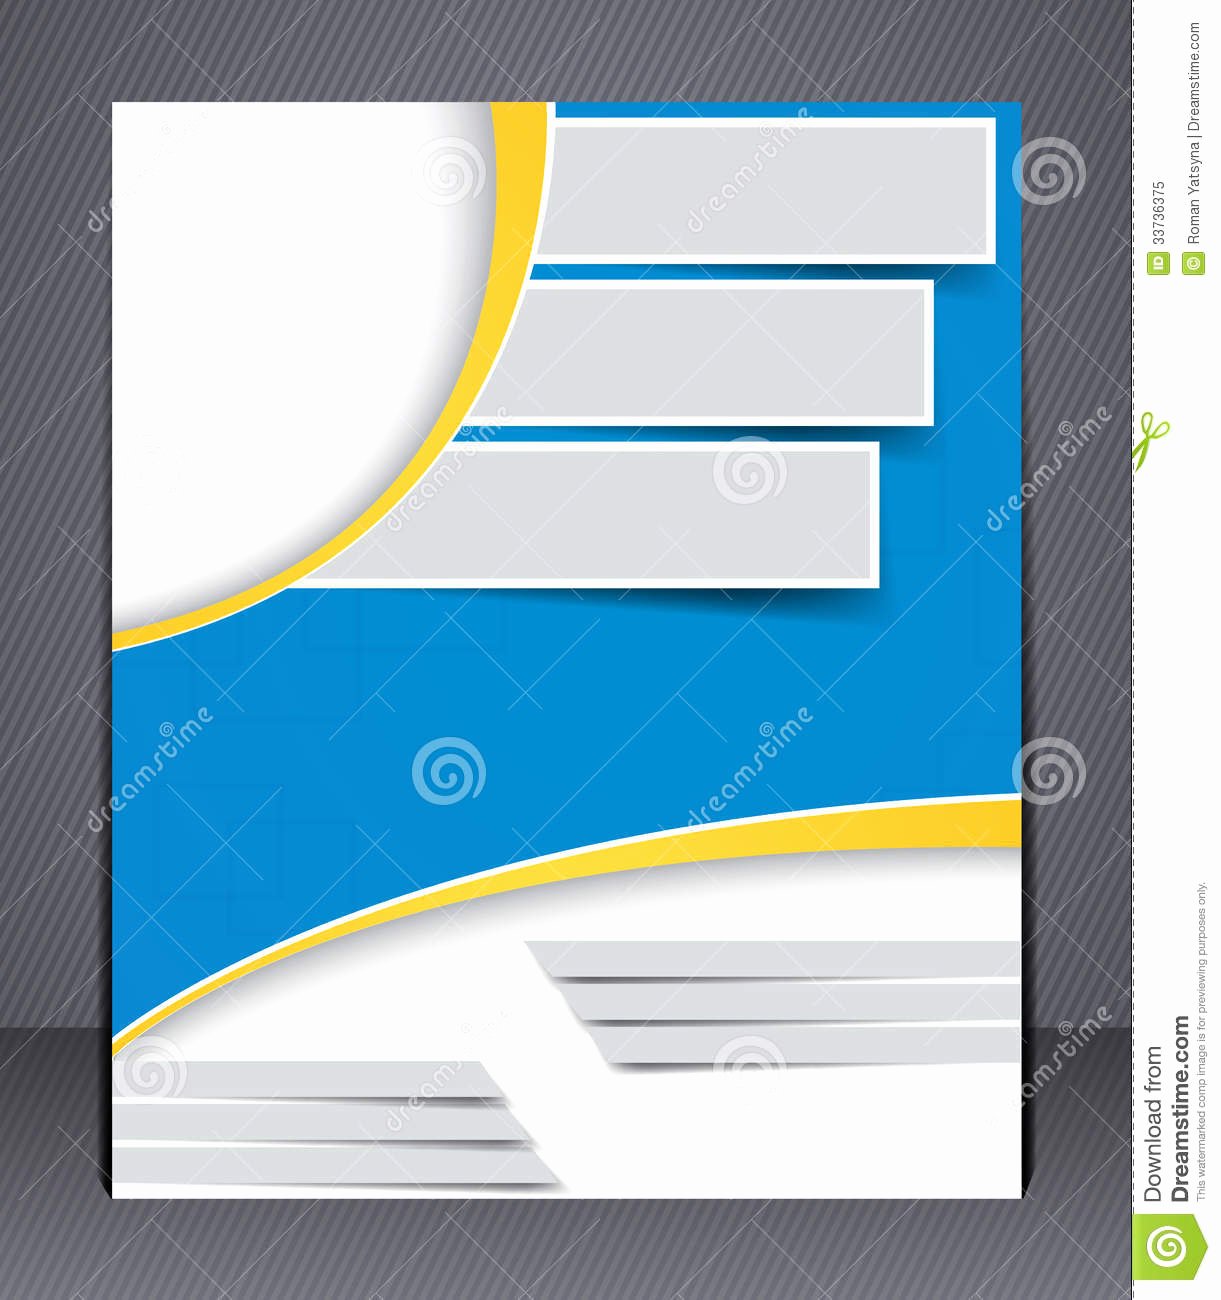 Brochure Design In Blue and Yellow Colors Stock Vector